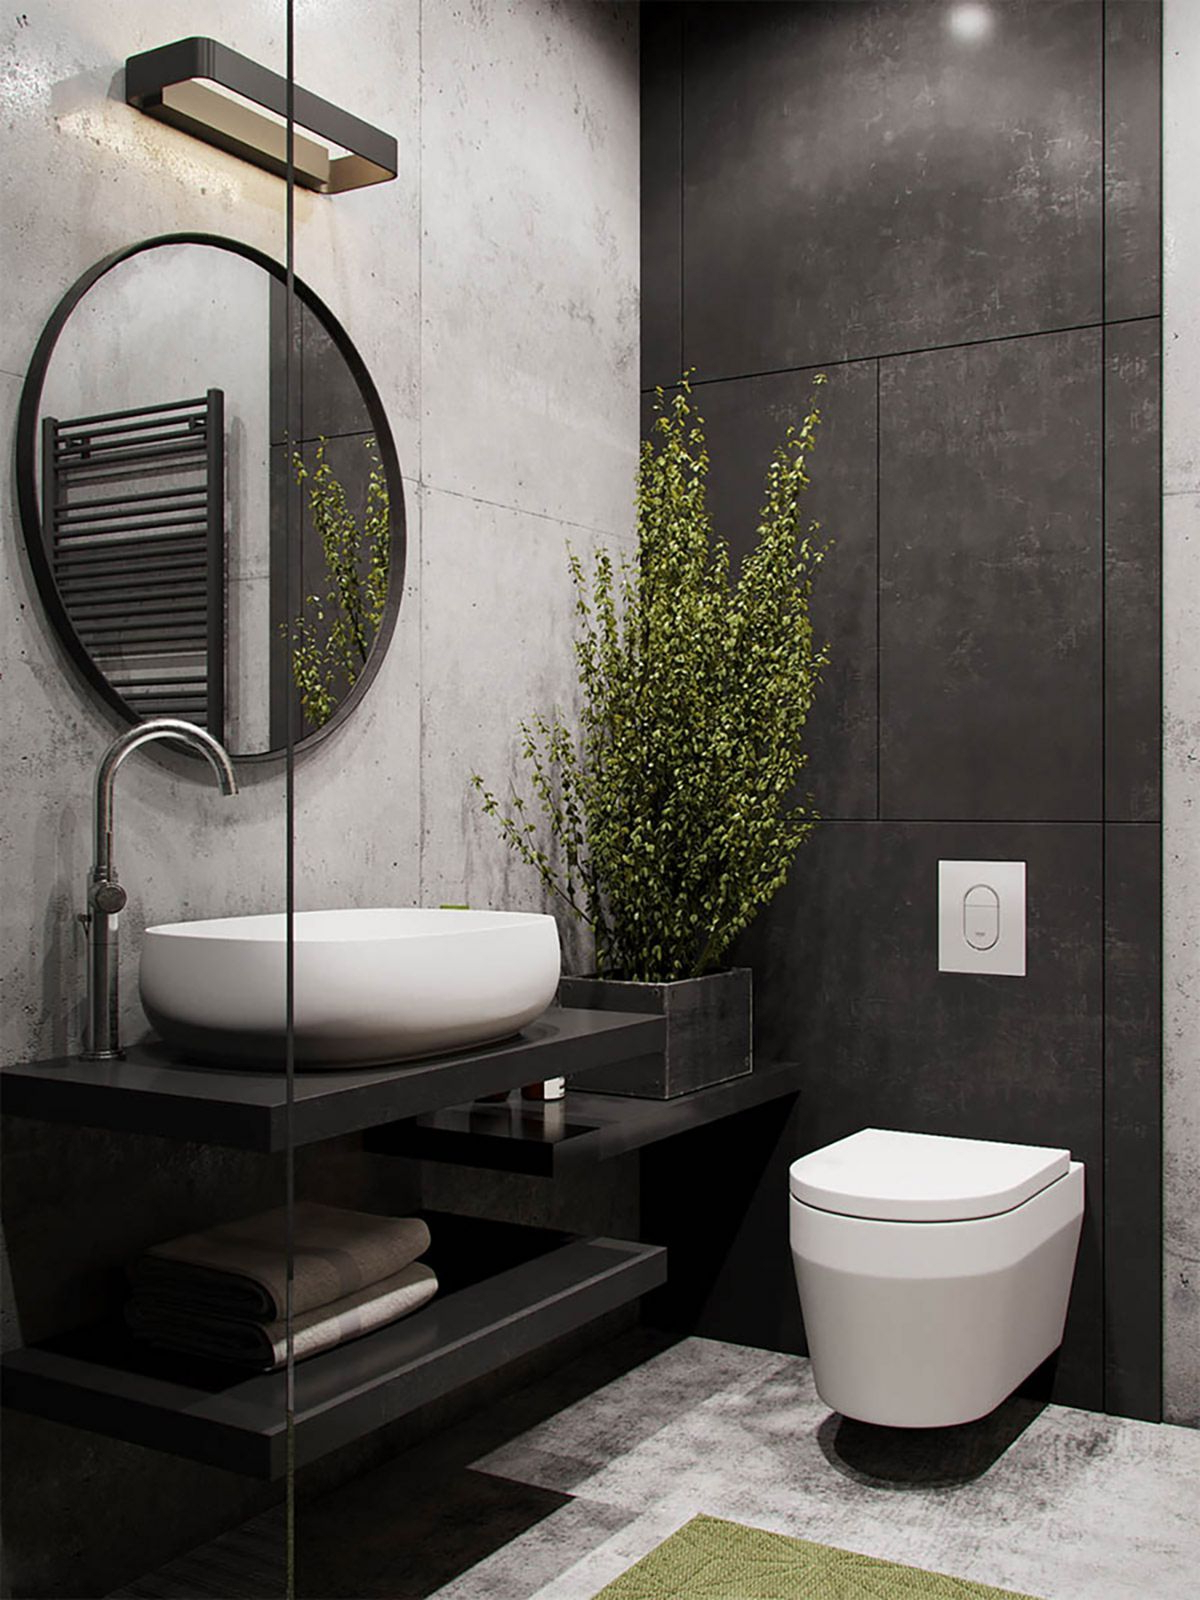 15 Gorgeous Industrial Bathroom Decoration Ideas The Most